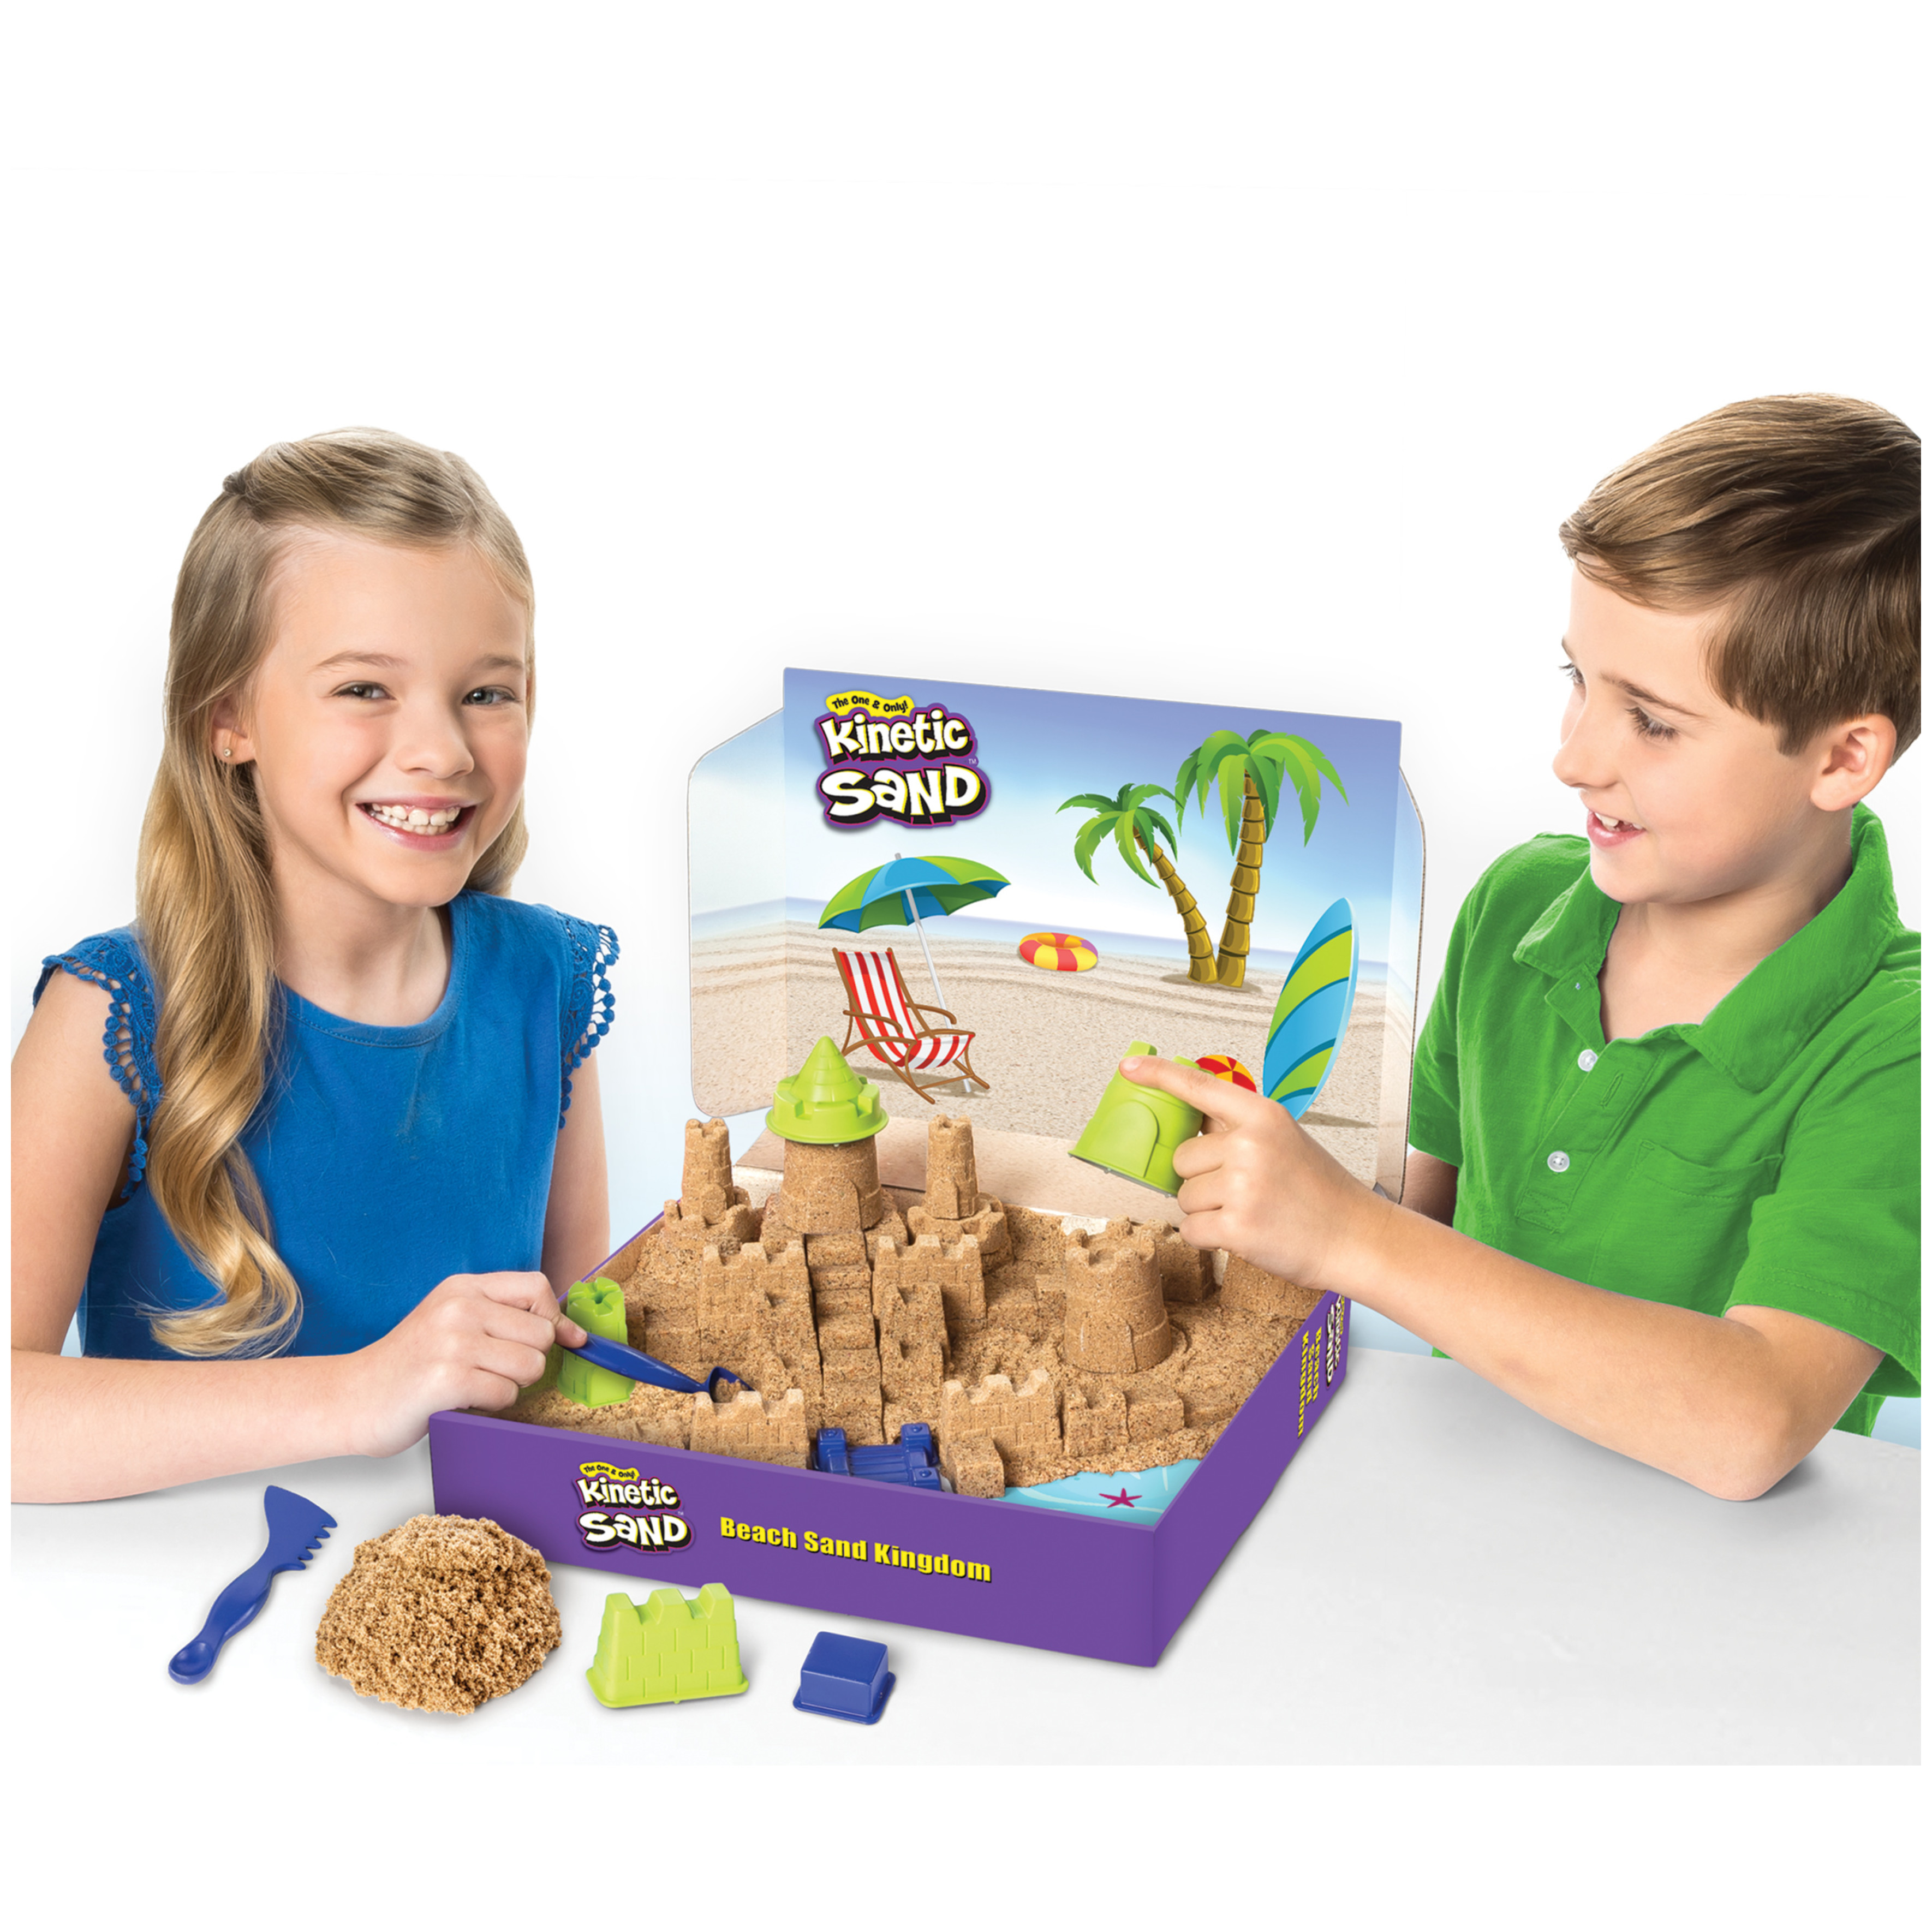 Kinetic Sand Beach Sand Kingdom Playset with 3lbs of Beach Sand, includes Molds and Tools, Play Sand Sensory Toys for Kids Ages 3 and up - image 3 of 9